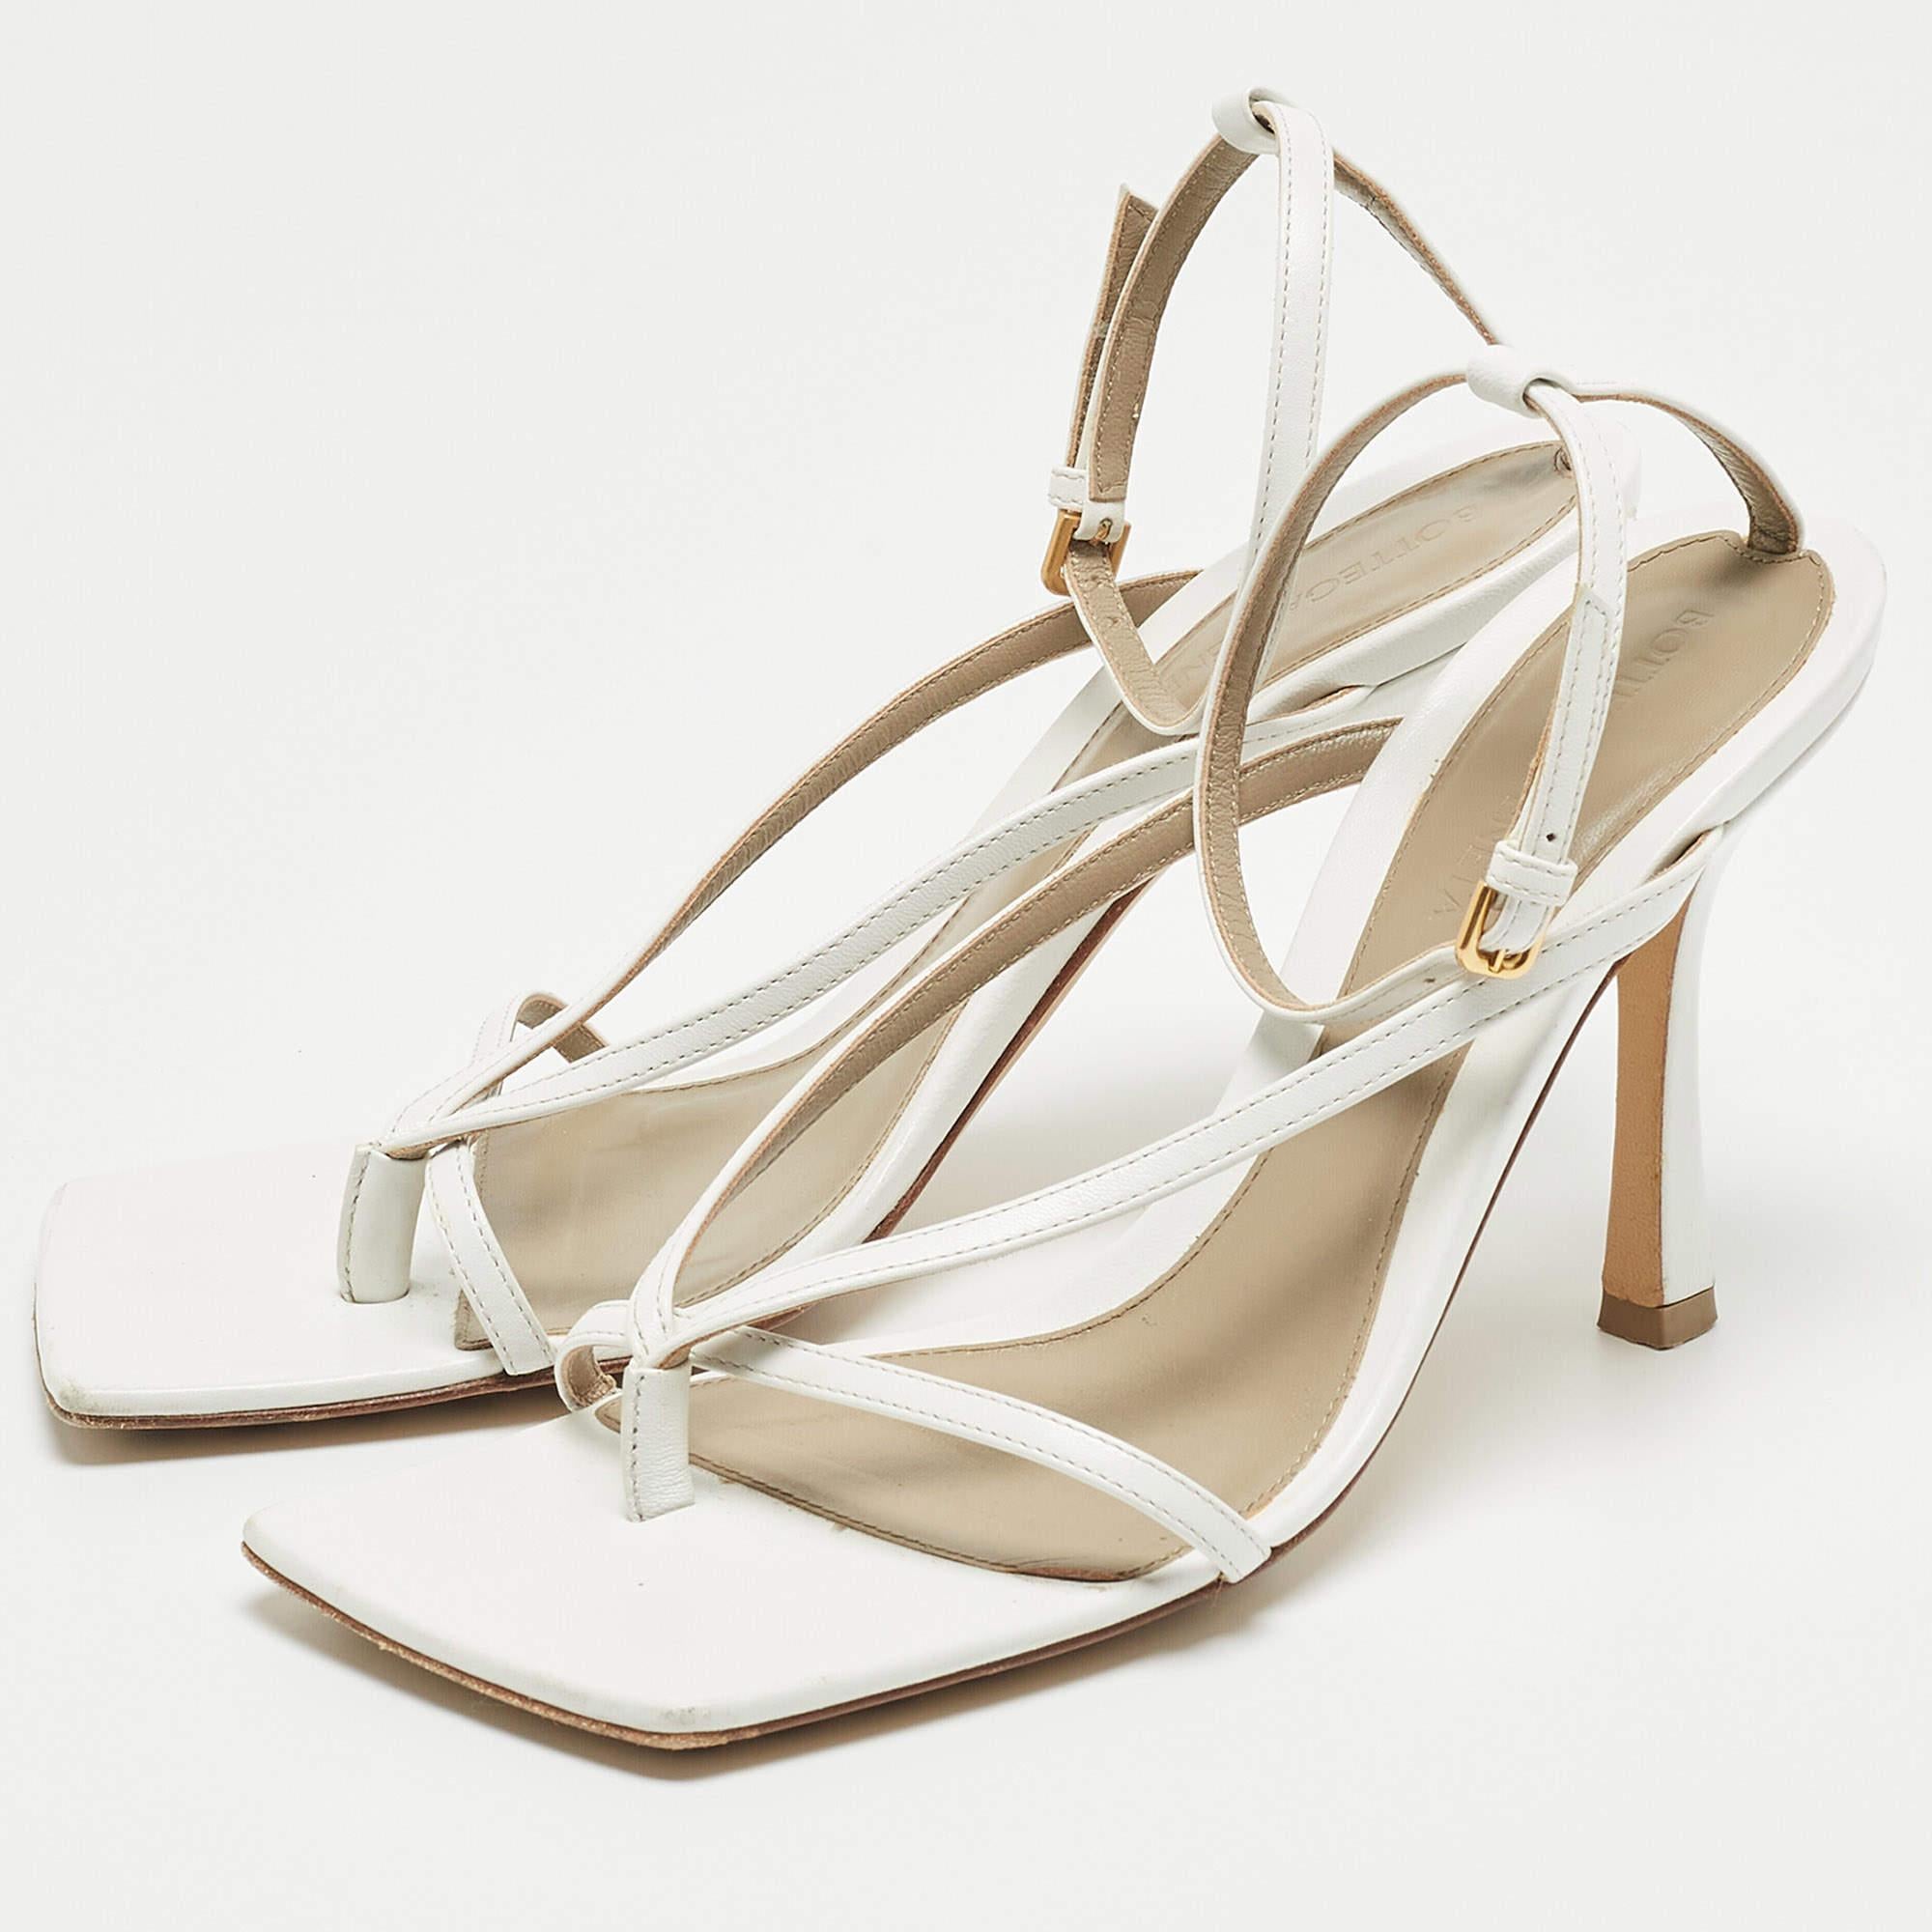 Wear these leather sandals from Bottega Veneta when you go out and watch heads turn. These white sandals have been designed in a thong style with buckled ankle straps. They are endowed with comfortable leather-lined insoles and stand tall on 10cm